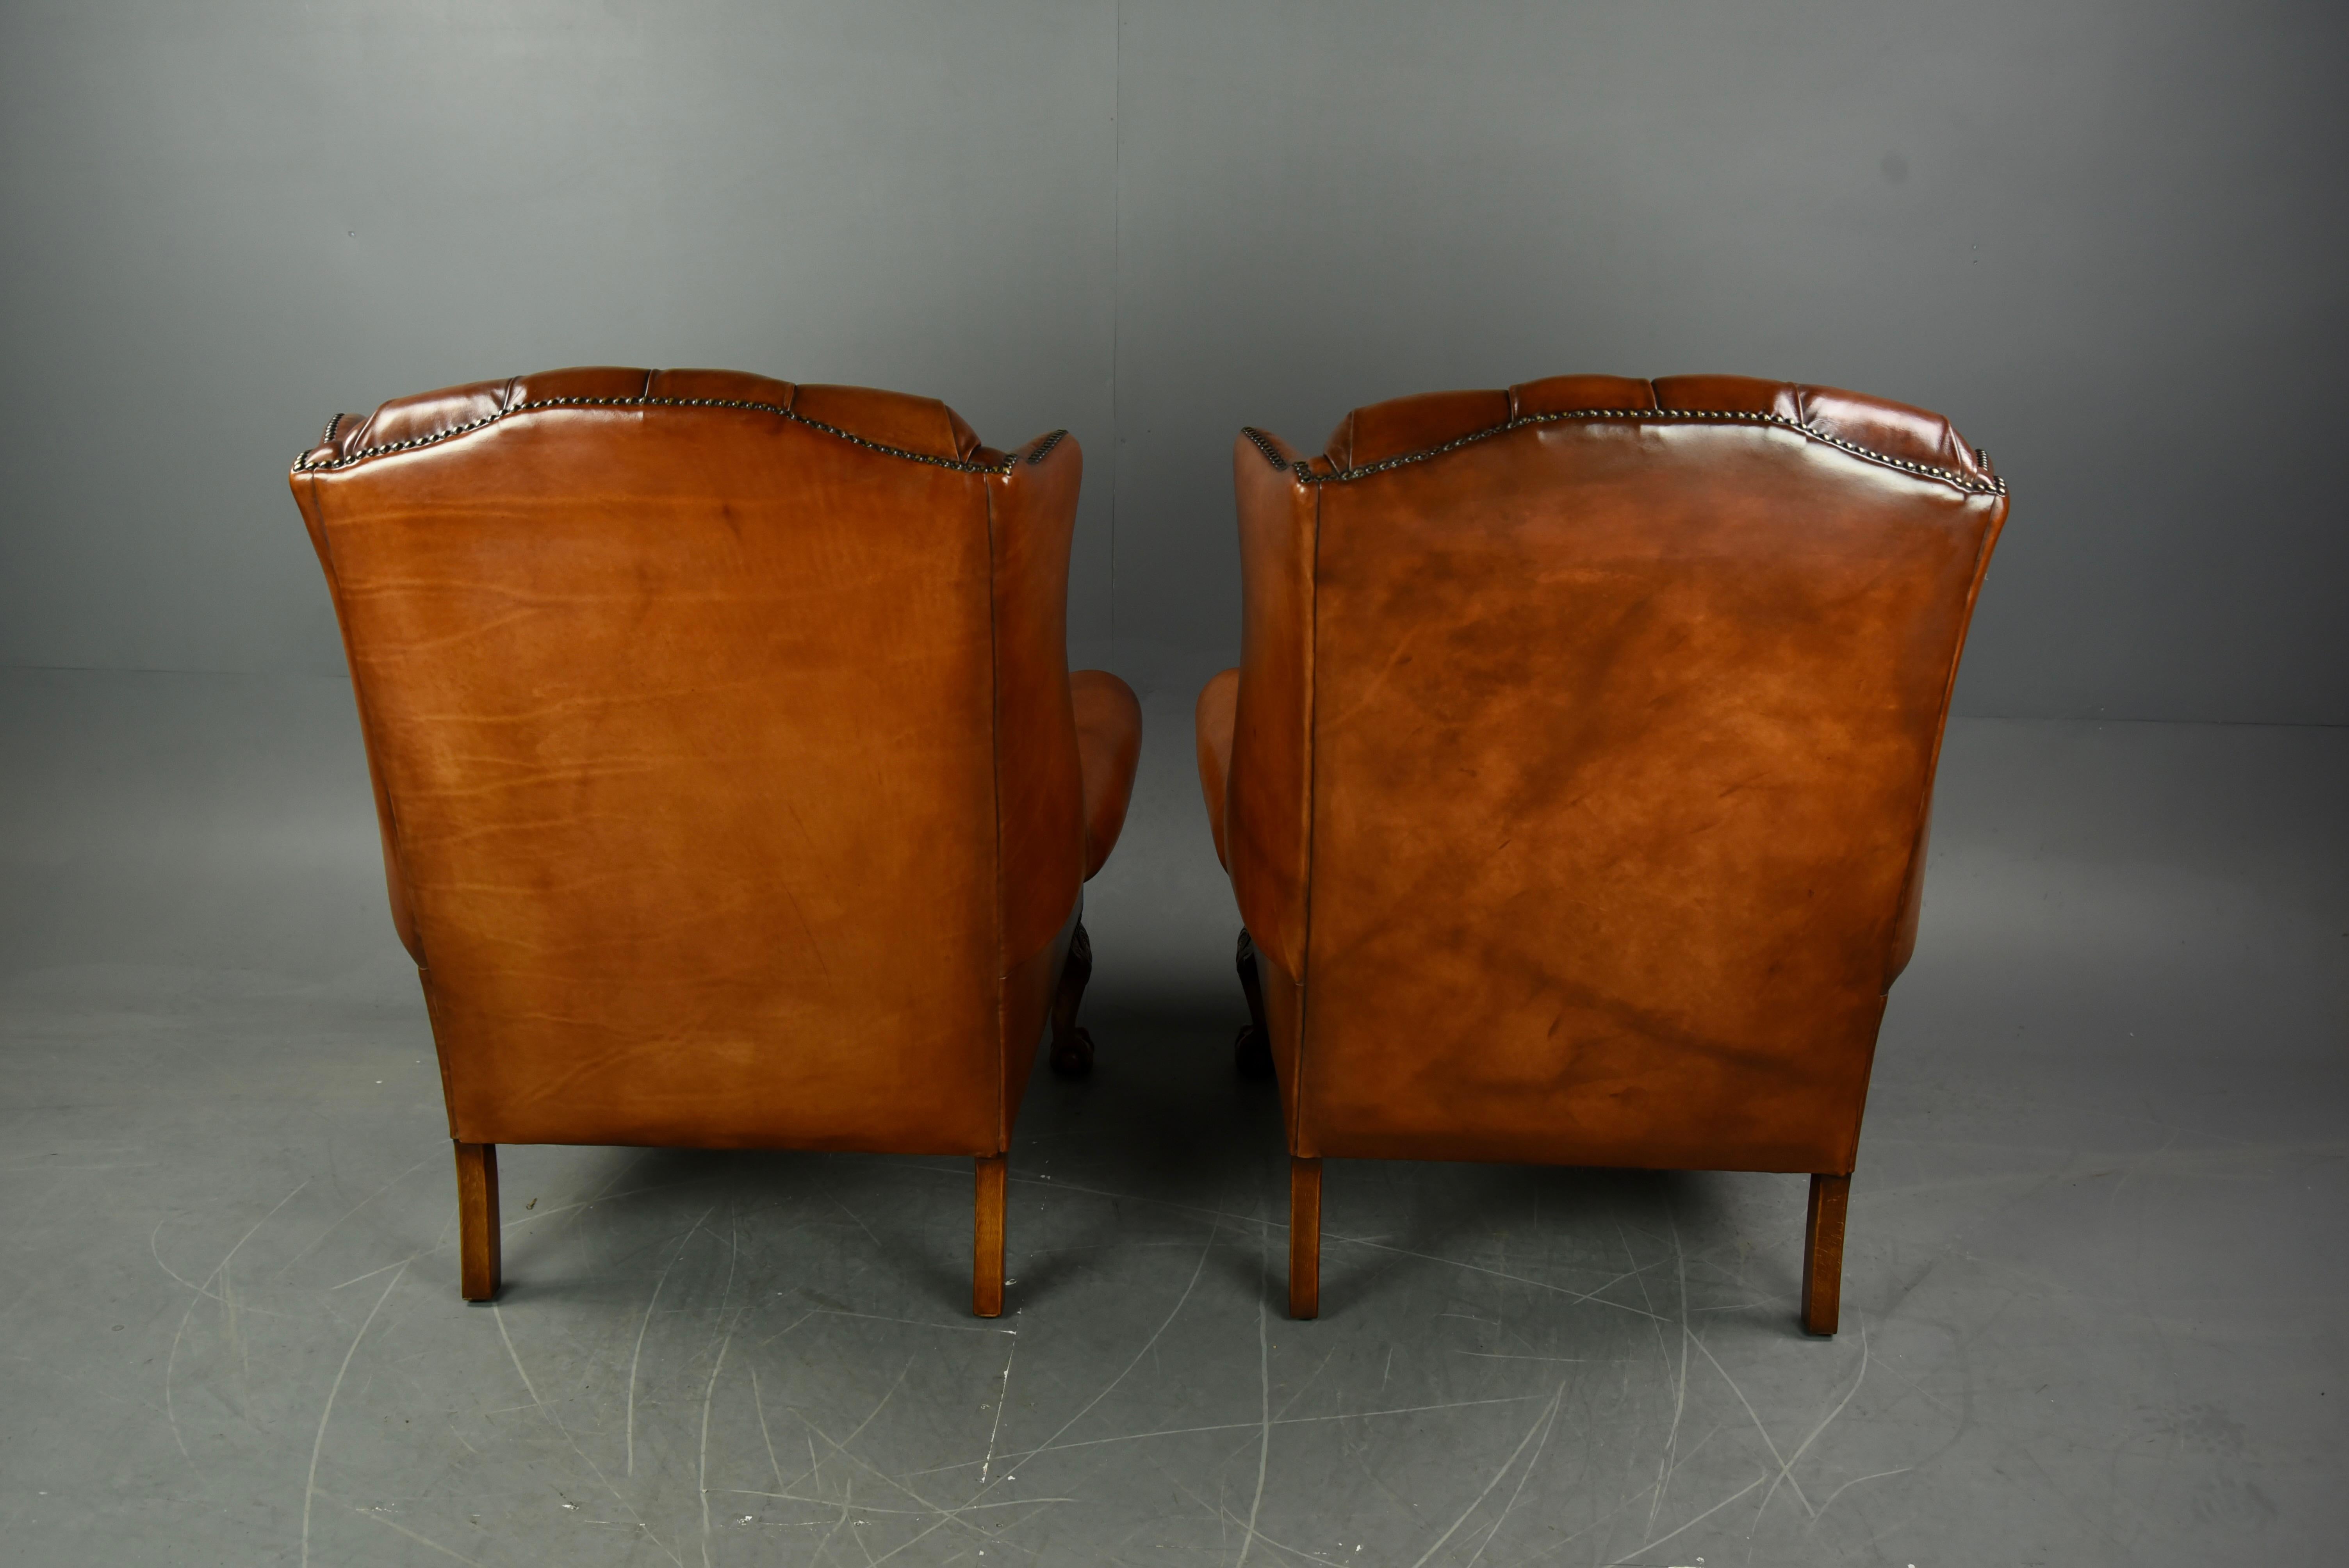 Early 20th Century Antique Pair of Georgian Style Wing Back Chairs